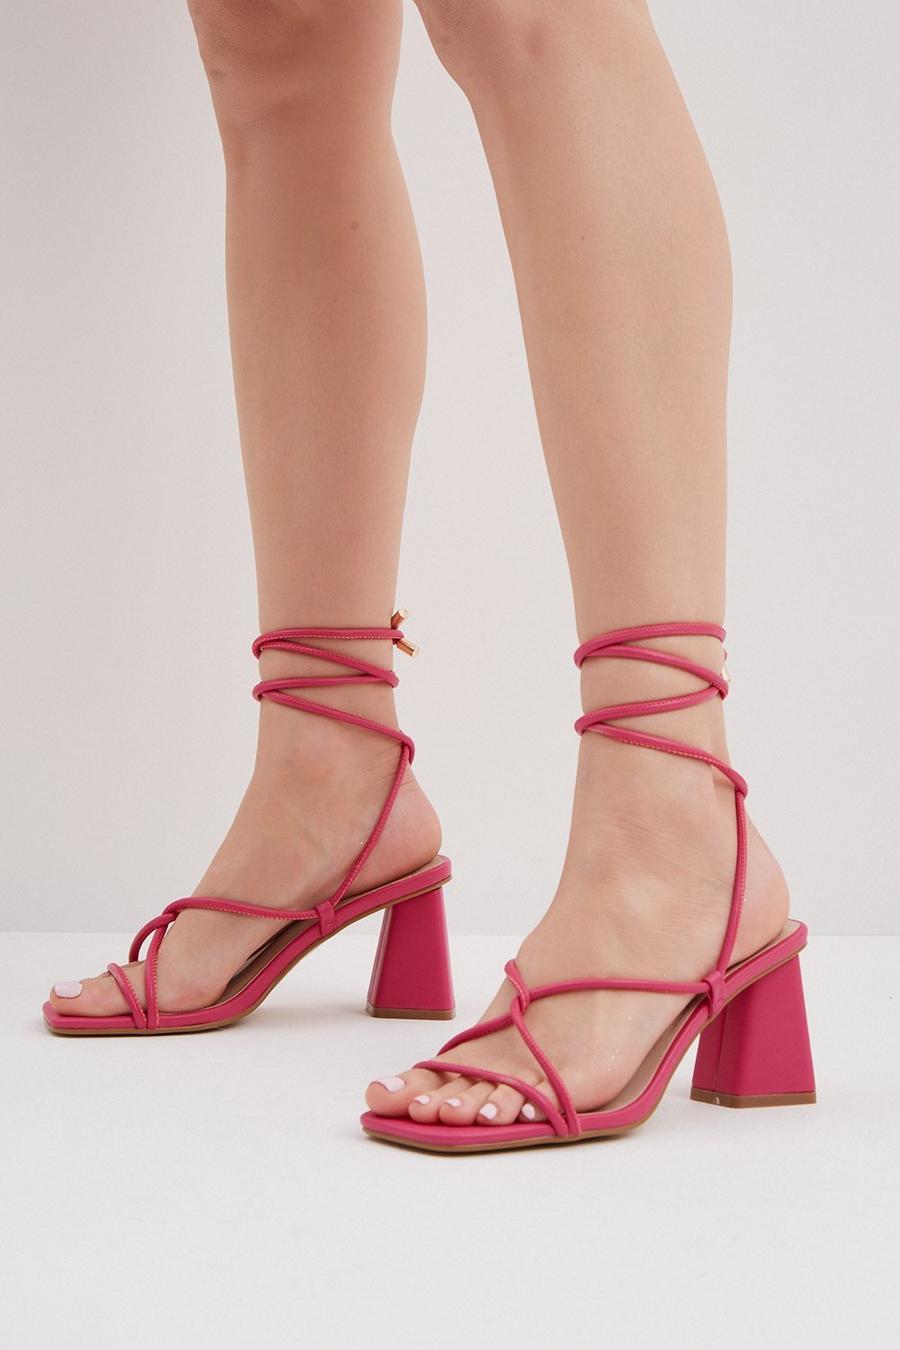 Sully Ankle Tie Flared Block Heel Sandals